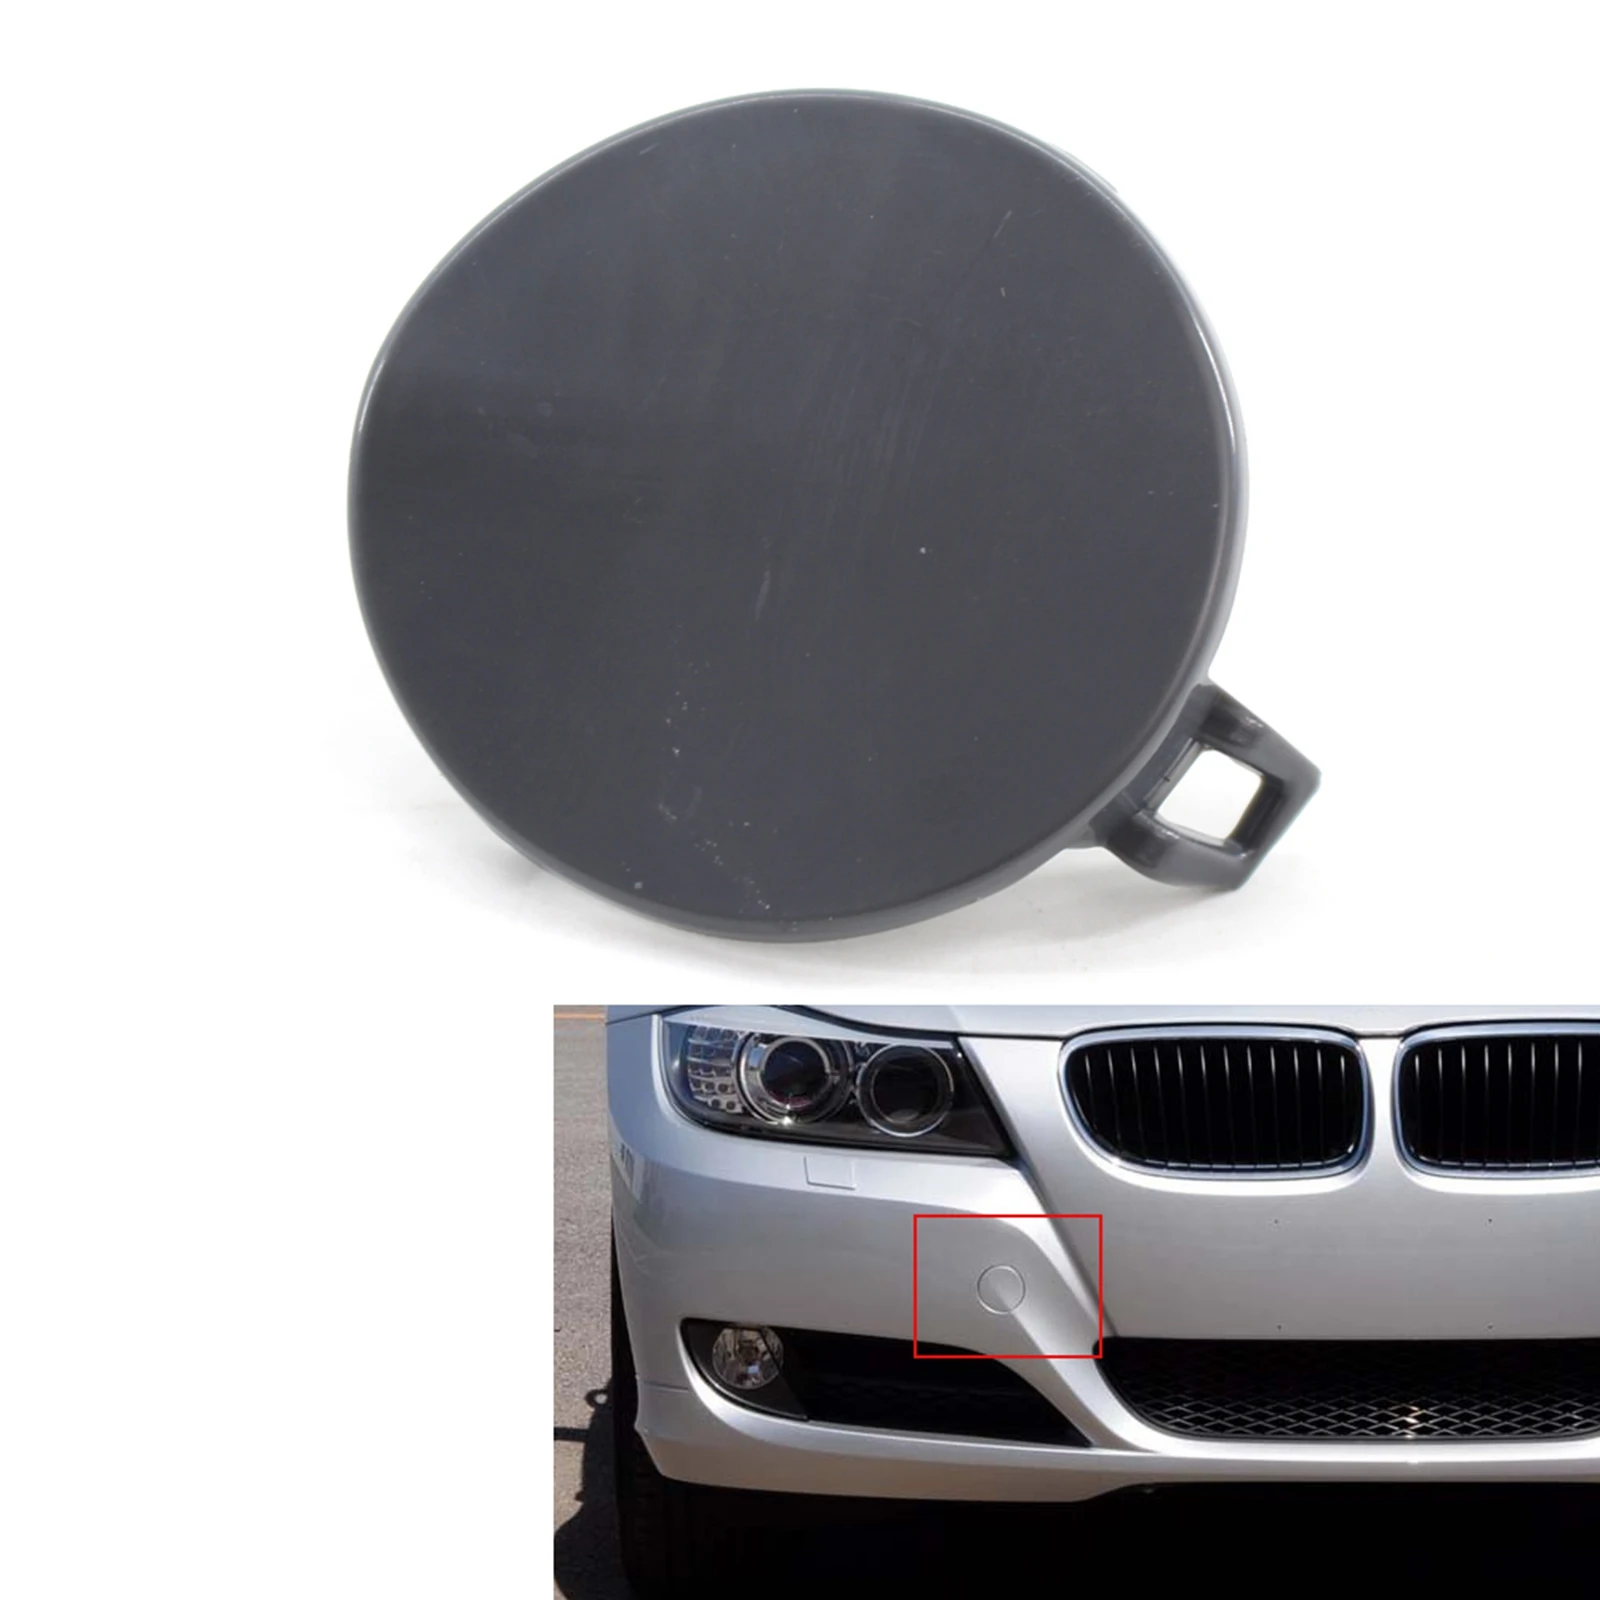 Tow Hook Covers Caps Replacement for Model E90 0 51117207299